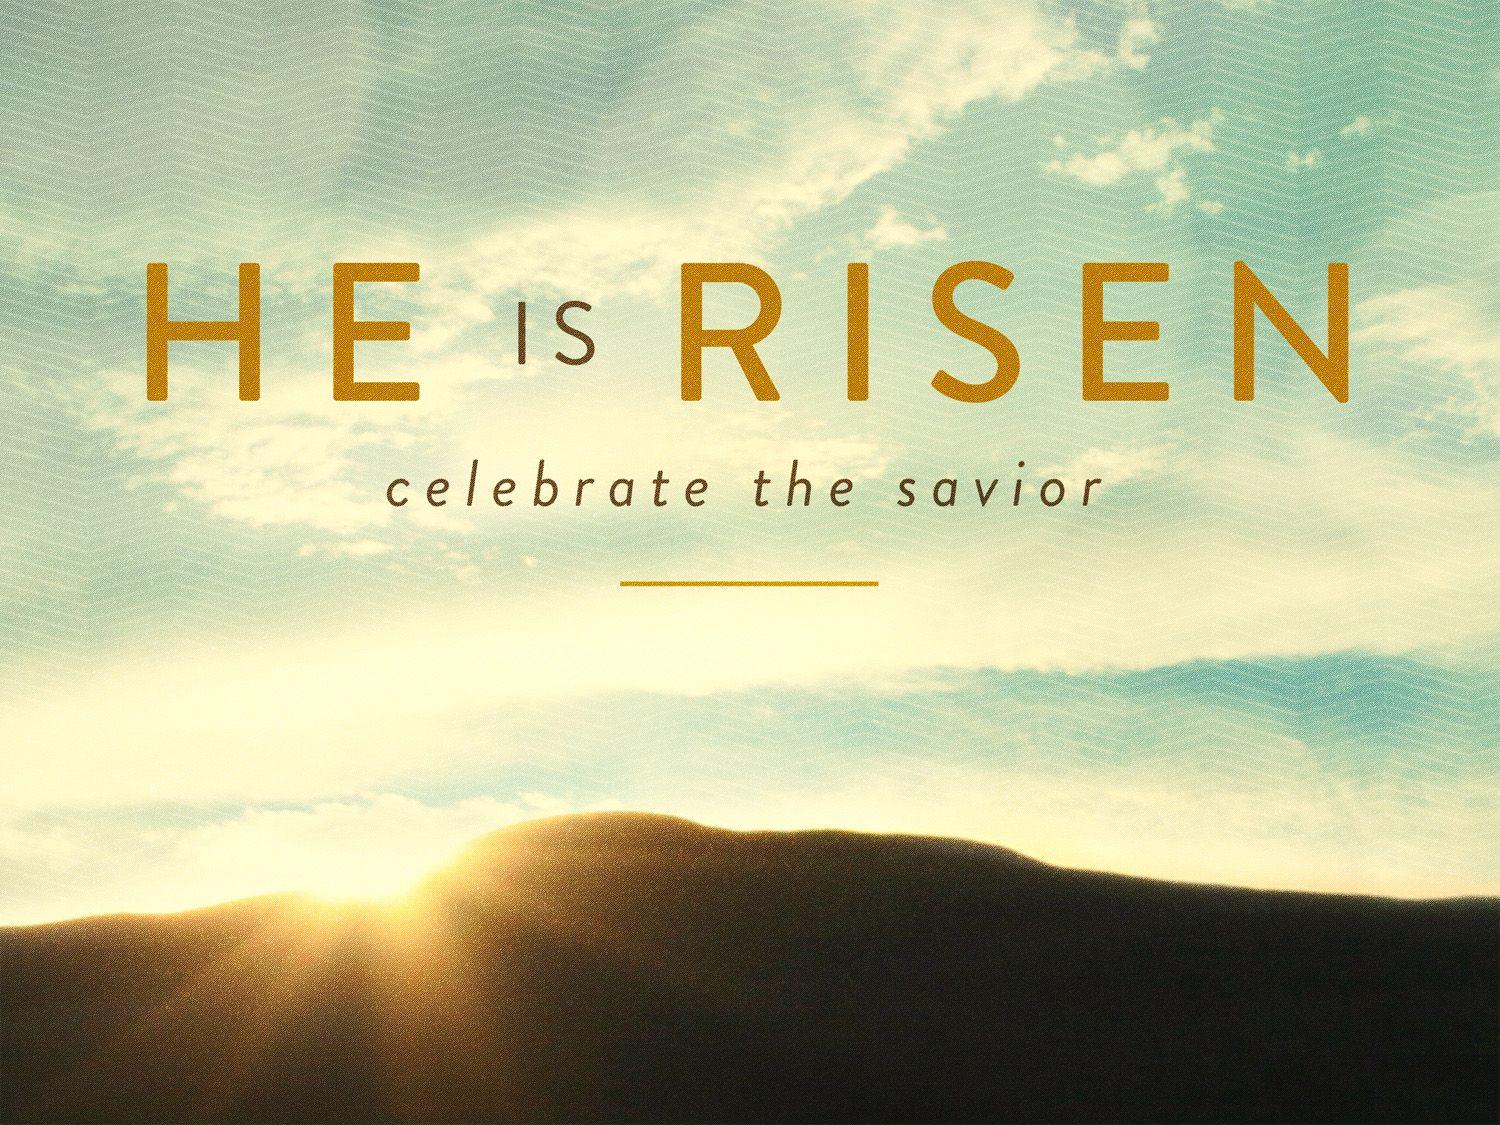 Christian Religious Easter Sunday Image Picture Photo Wallpaper HD